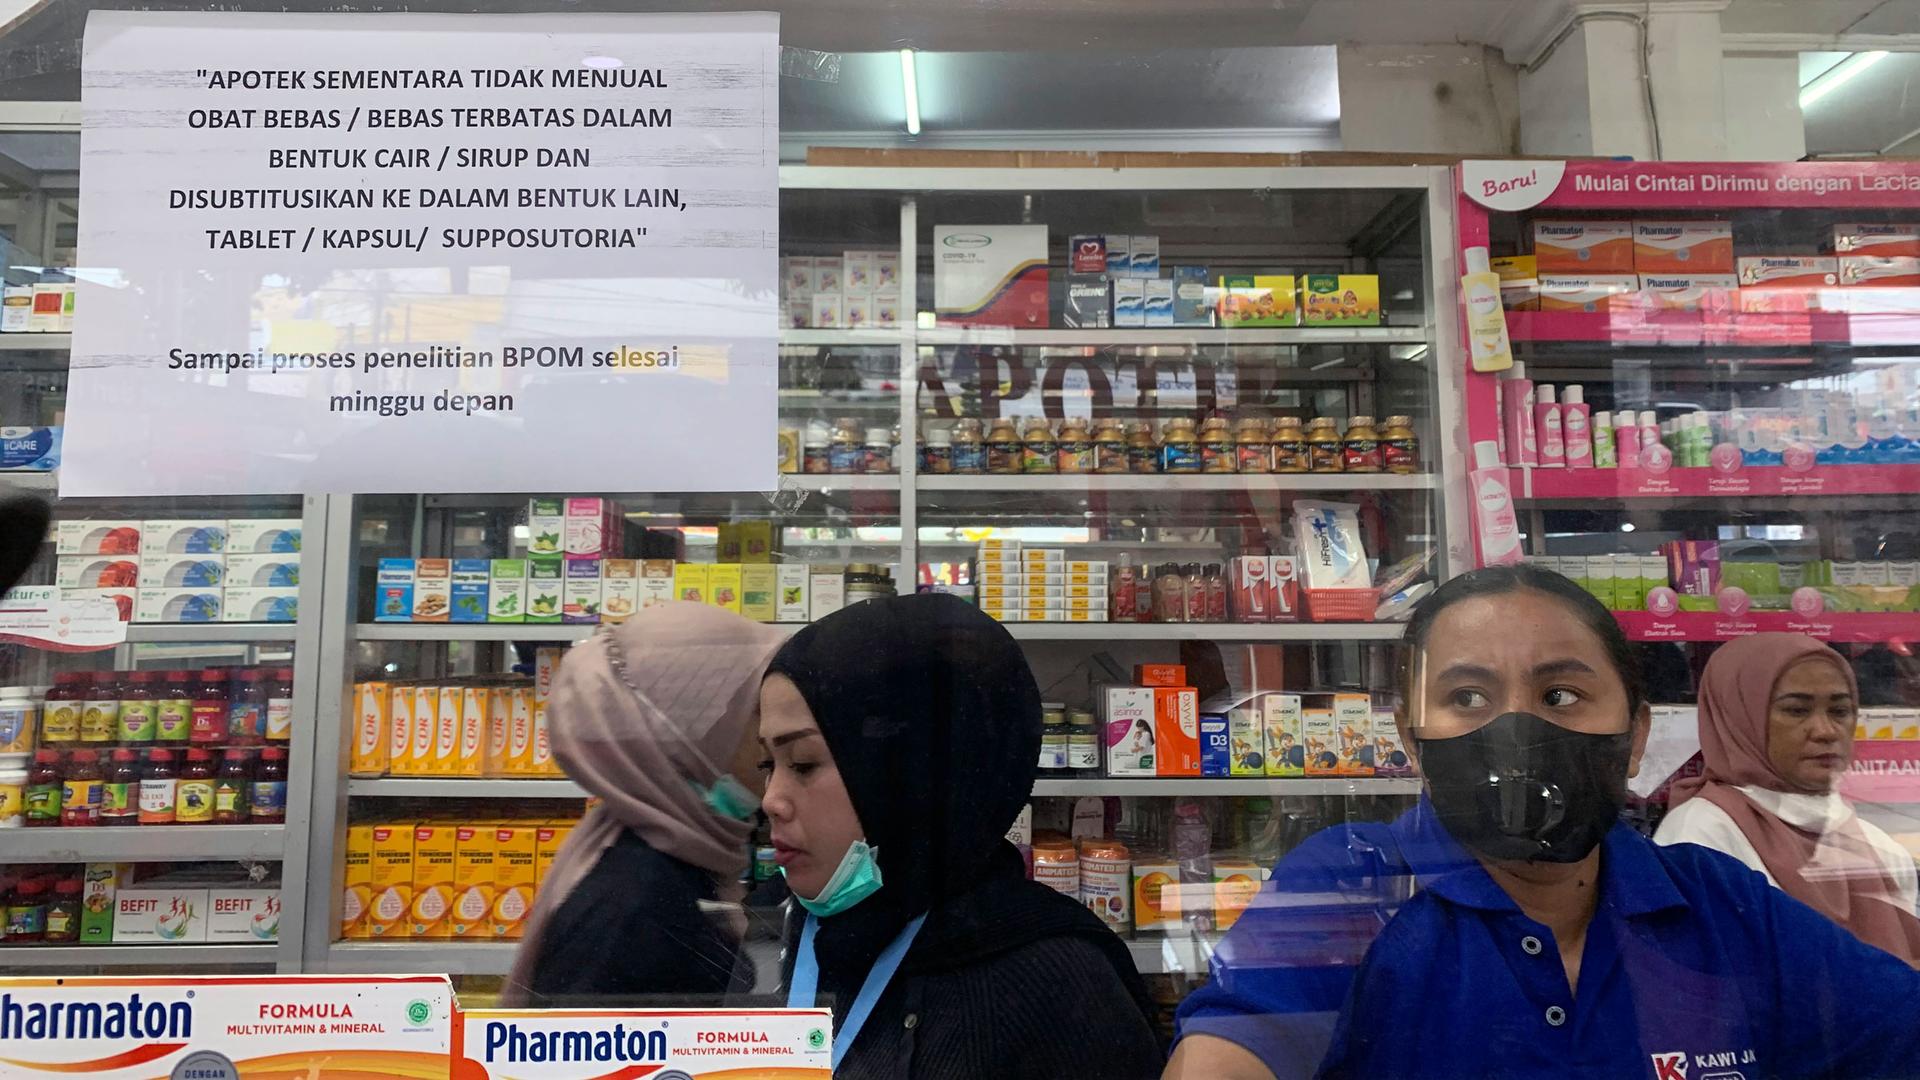 Employees wait for customers at a counter displaying a notification saying that the sale of medicinal syrup is temporarily halted at a pharmacy in Jakarta, Indonesia, Thursday, Oct. 20, 2022. 